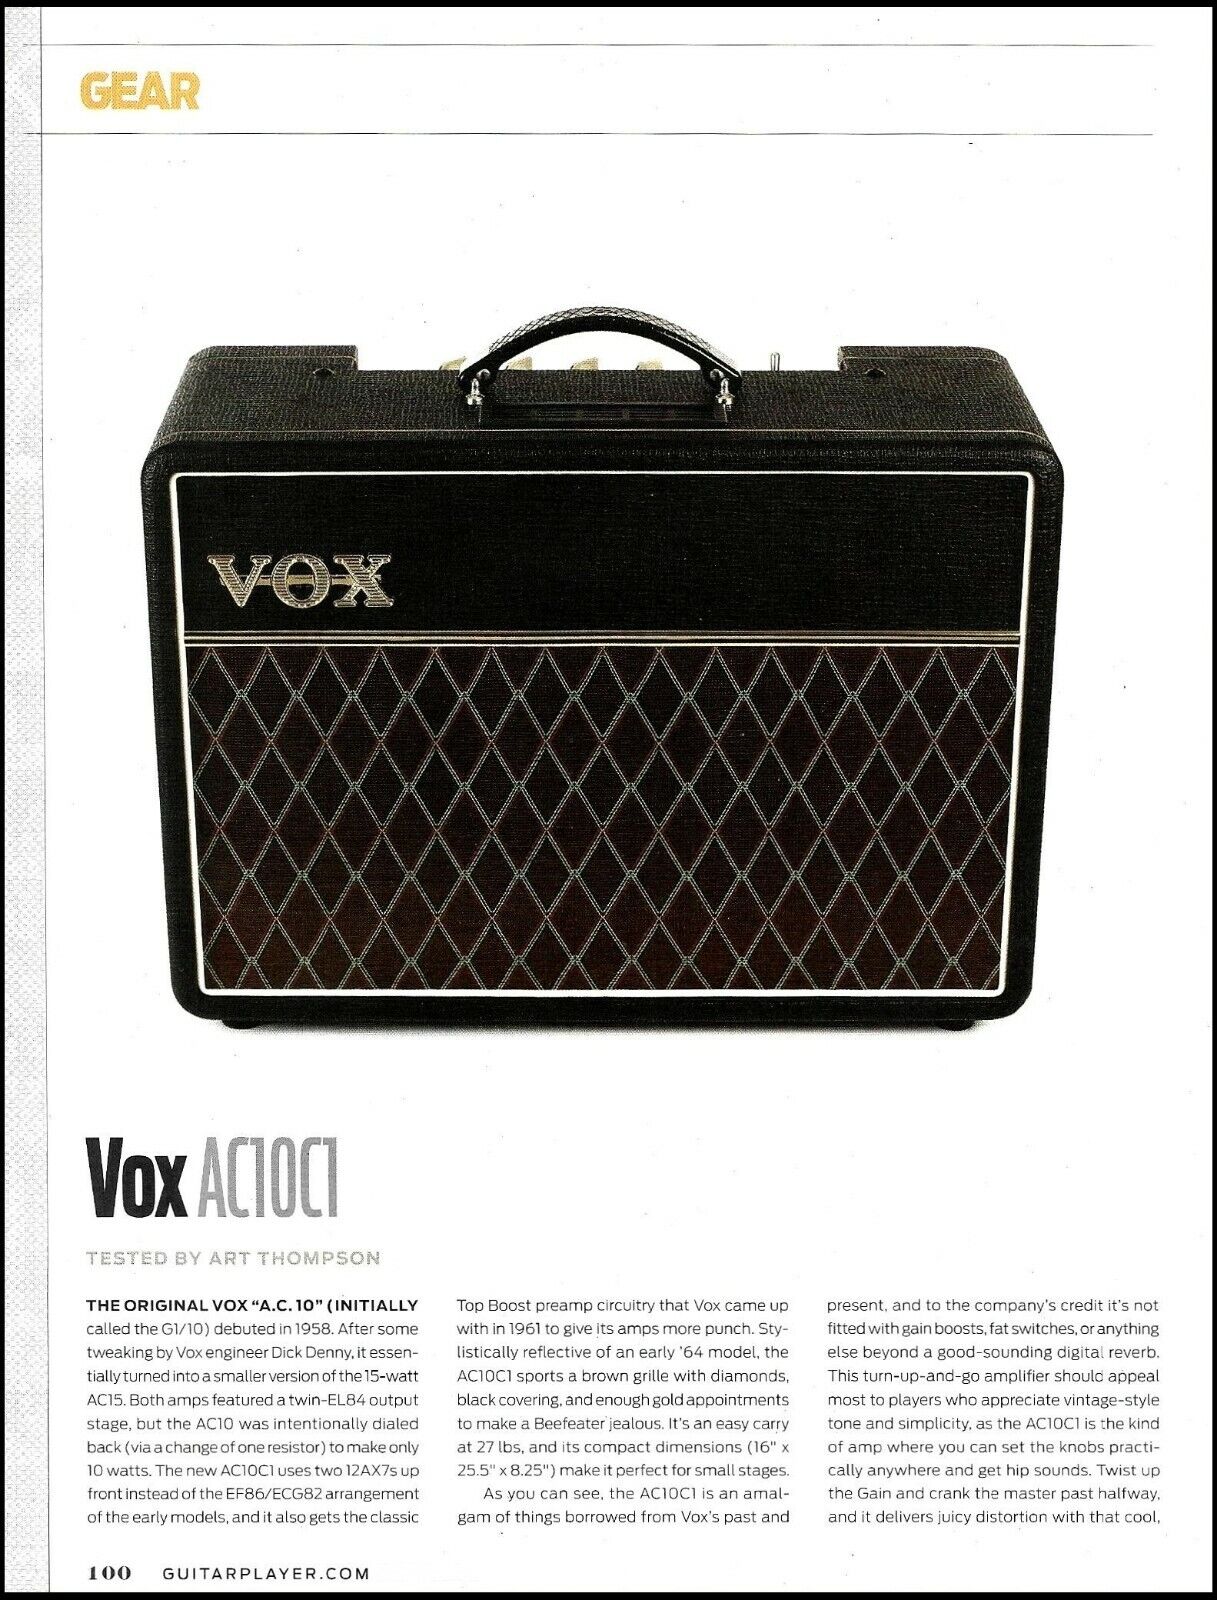 Vox AC10C1 guitar amp 2-page review article with specs 2016 print